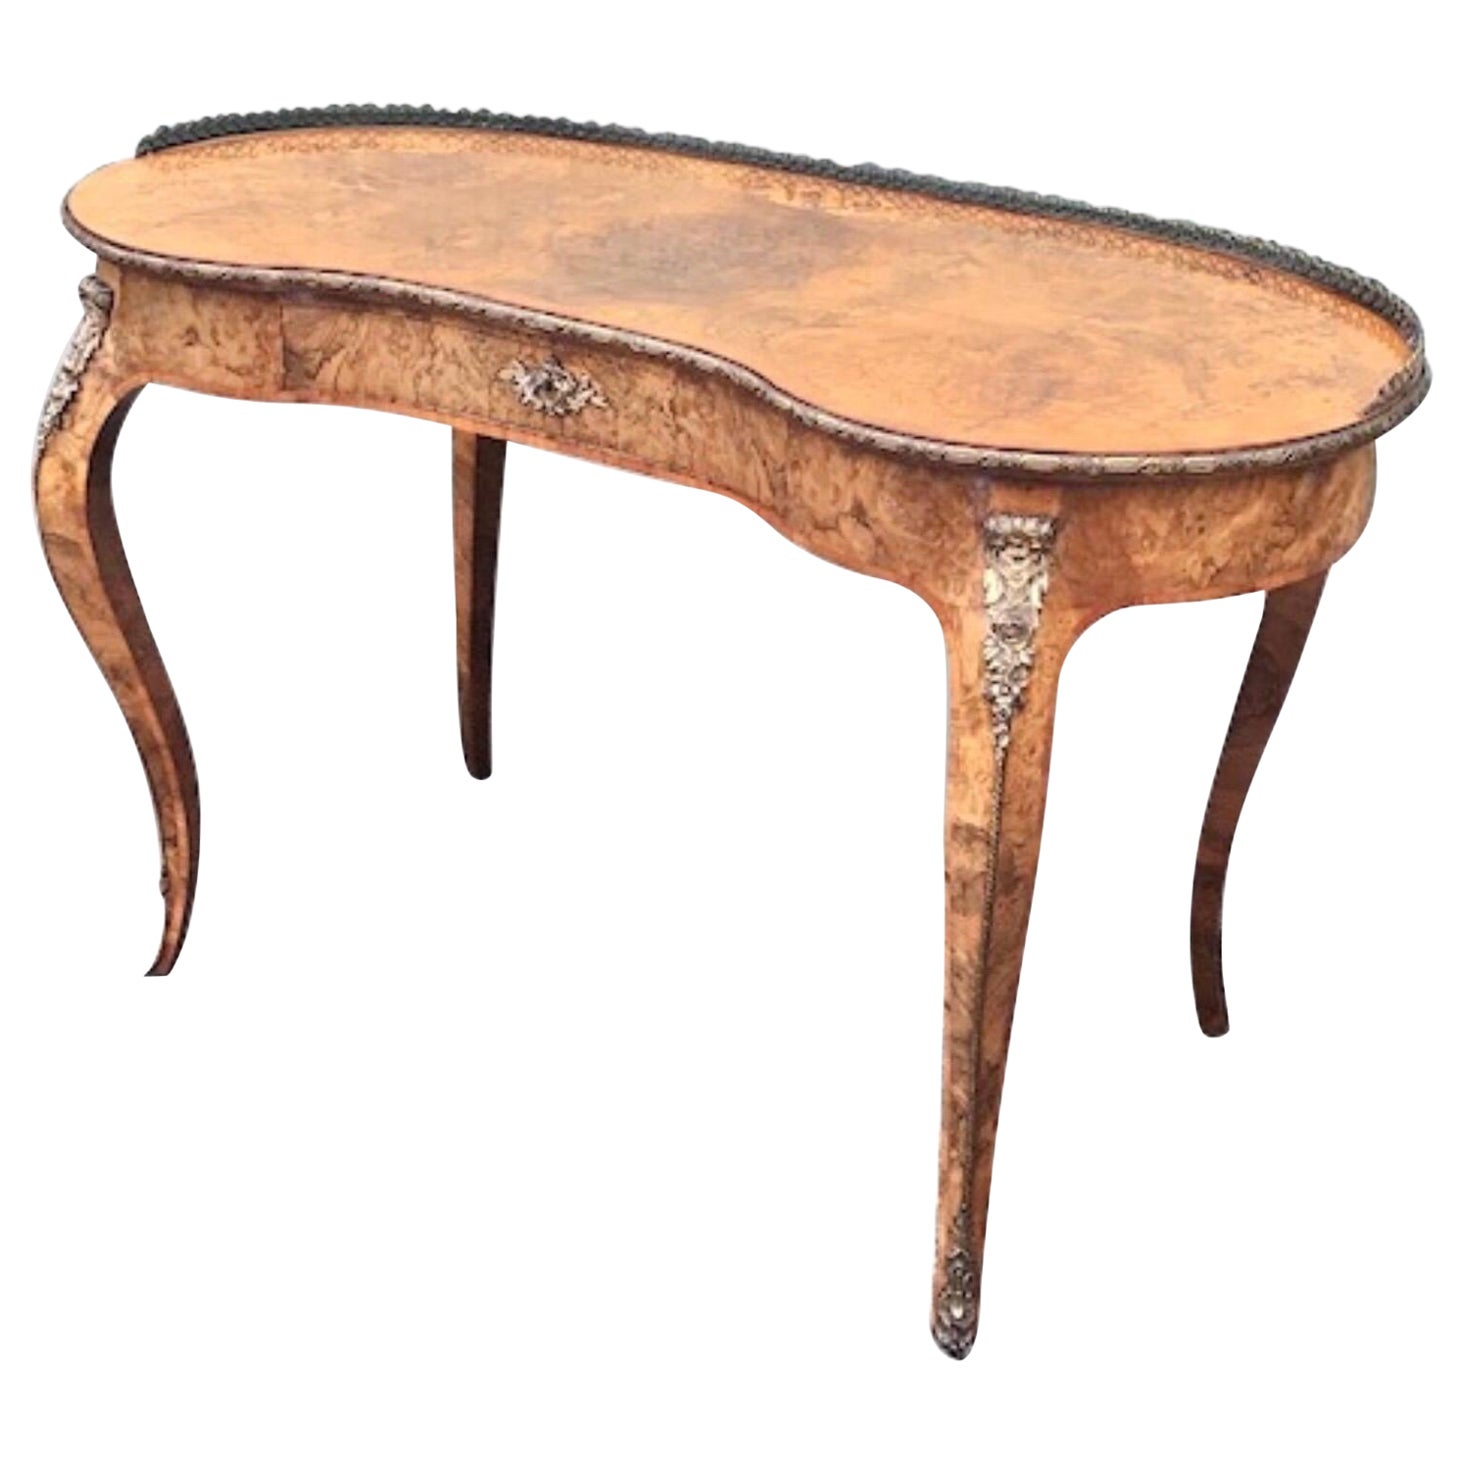 Antique Inlaid and Marquetry Burr Walnut Kidney Shaped Table Desk For Sale